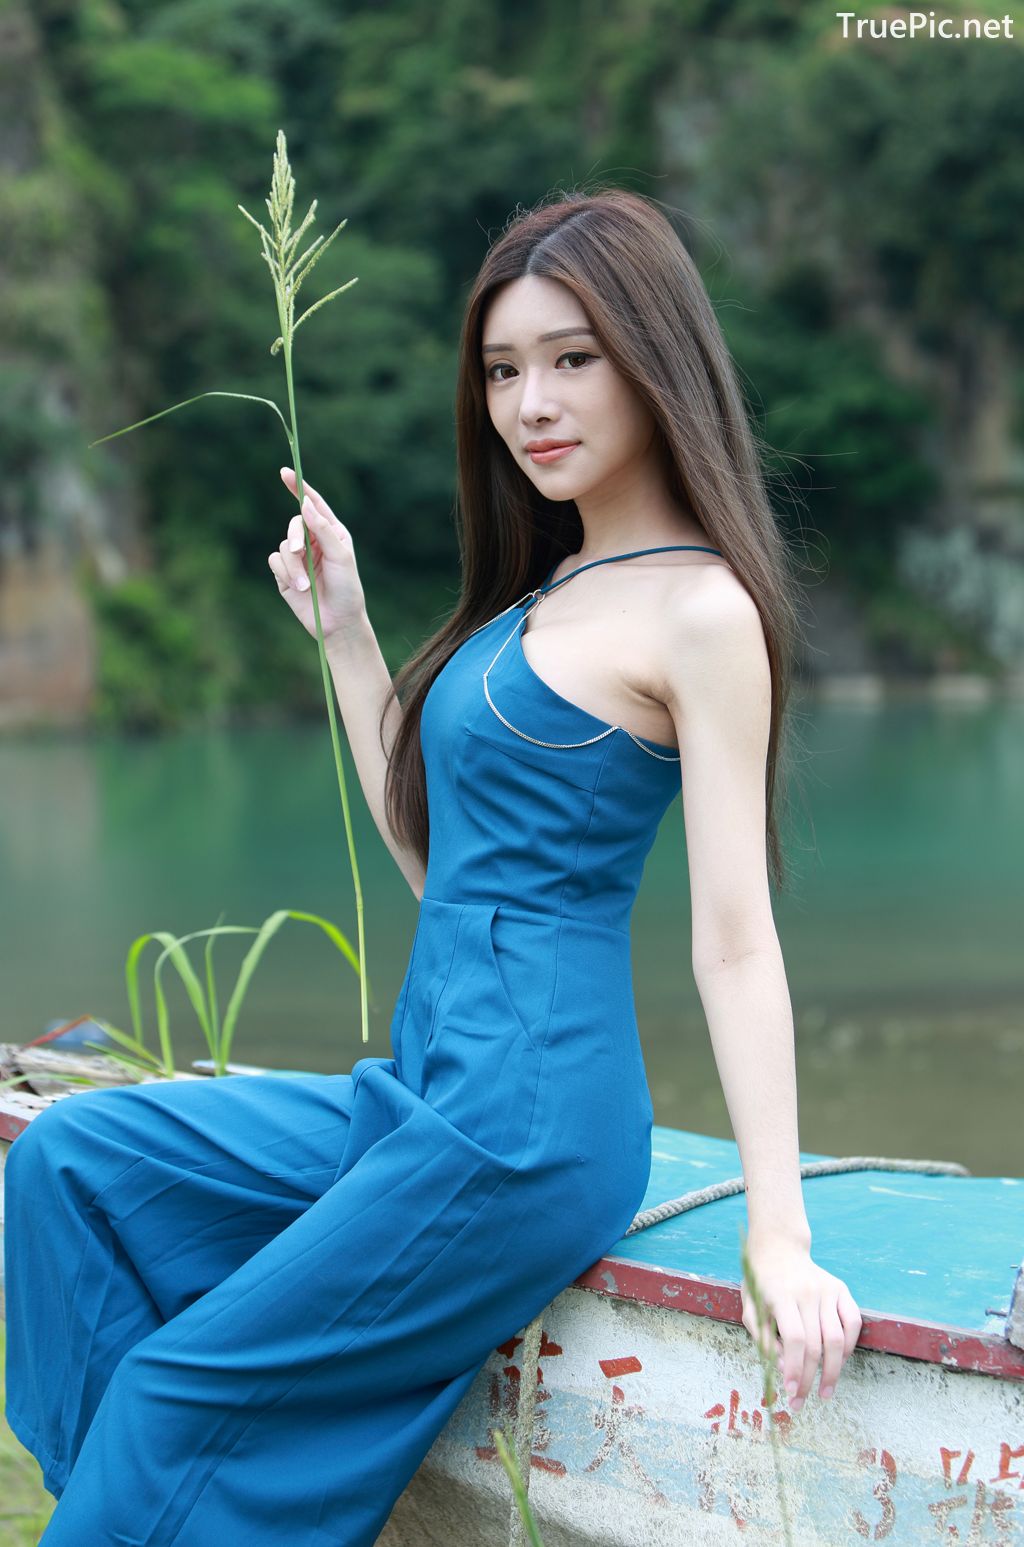 Image-Taiwanese-Pure-Girl-承容-Young-Beautiful-And-Lovely-TruePic.net- Picture-28